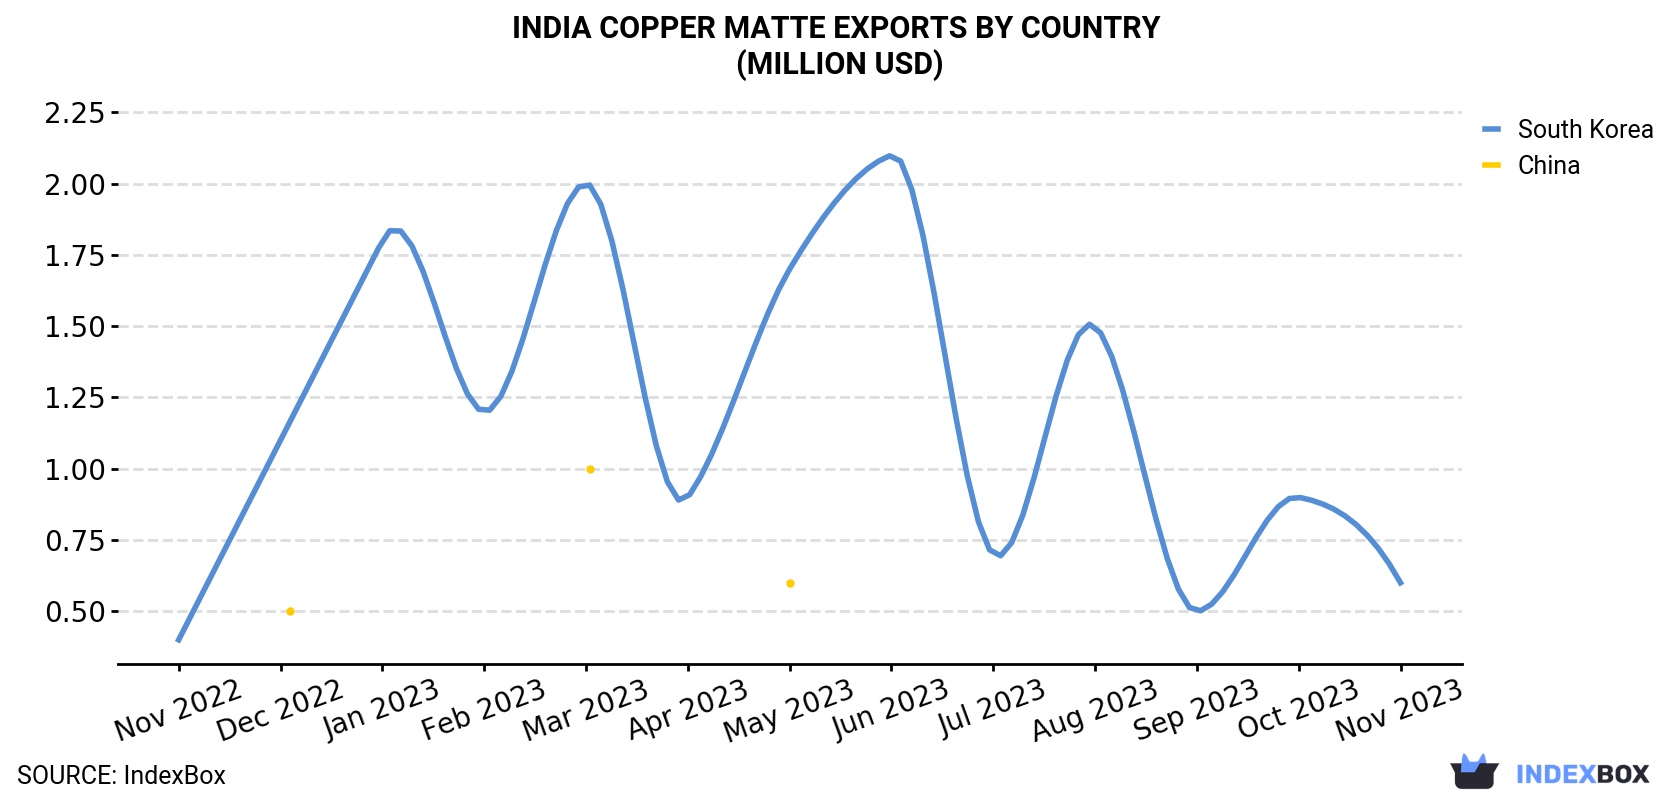 India Copper Matte Exports By Country (Million USD)